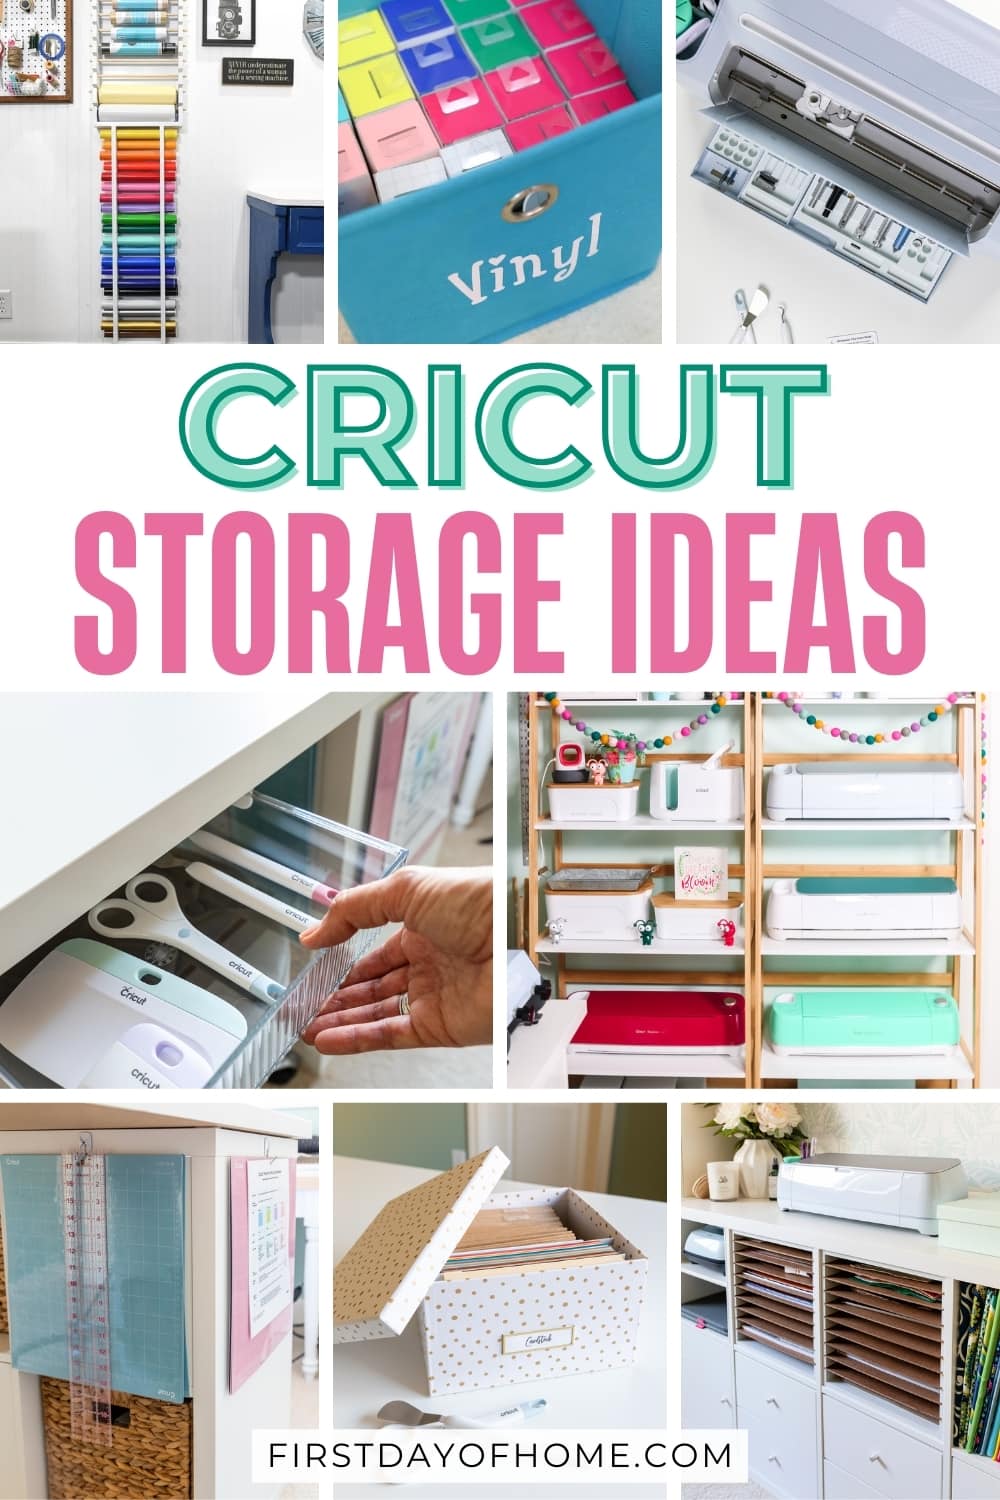 Collage of Cricut organizing ideas including mat storage and vinyl storage. Text overlay reads "Cricut Storage Ideas".